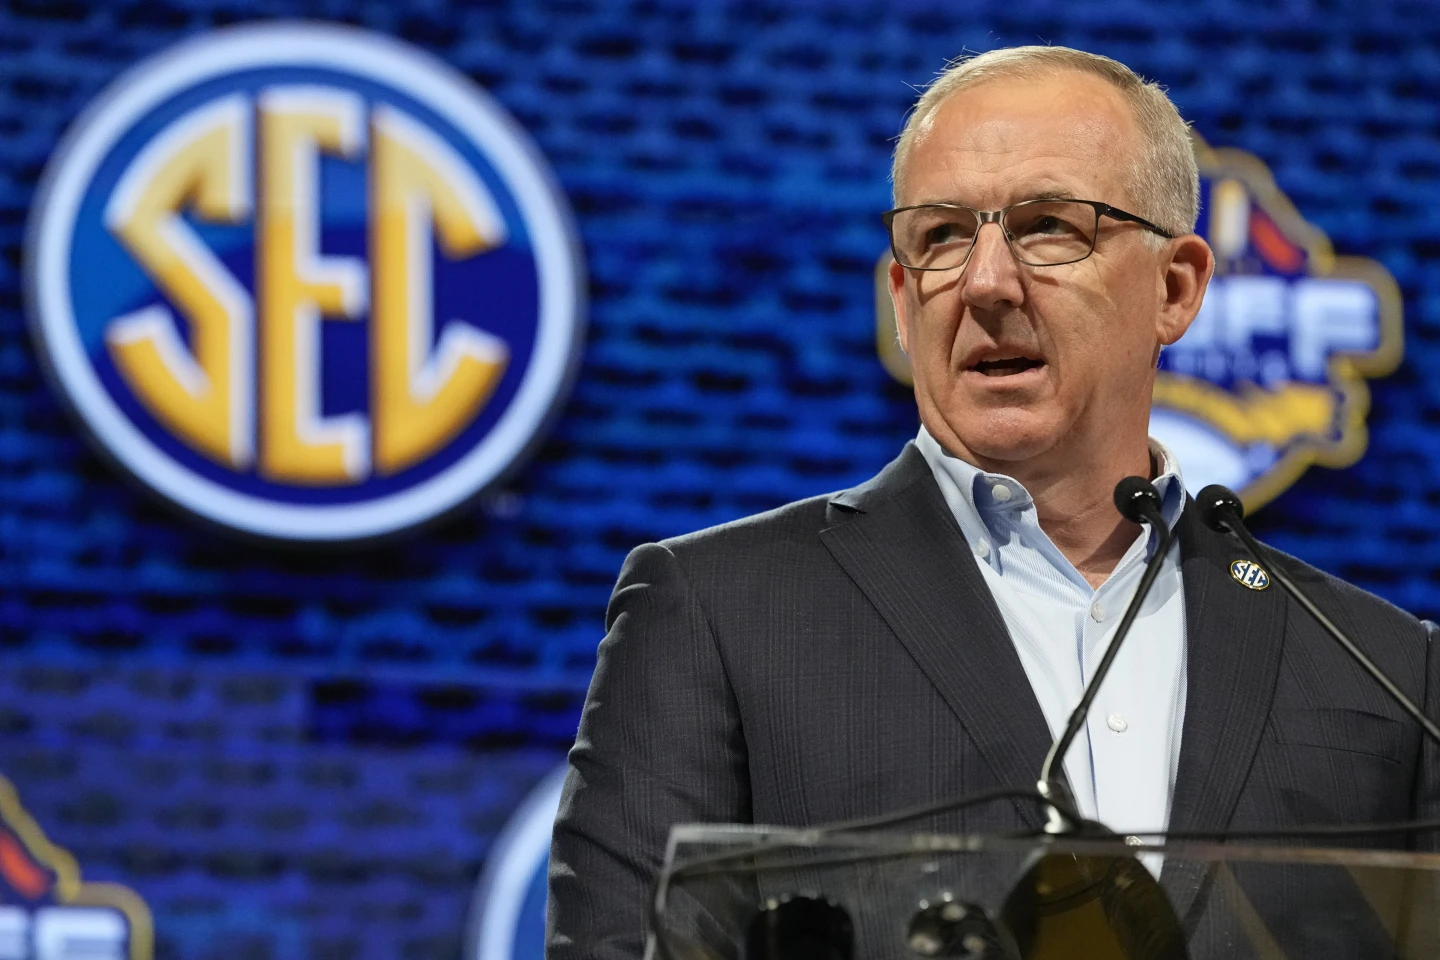 SEC commissioner, who earned $3.8 million in 2022, calls on Congress to set national standards for athlete compensation